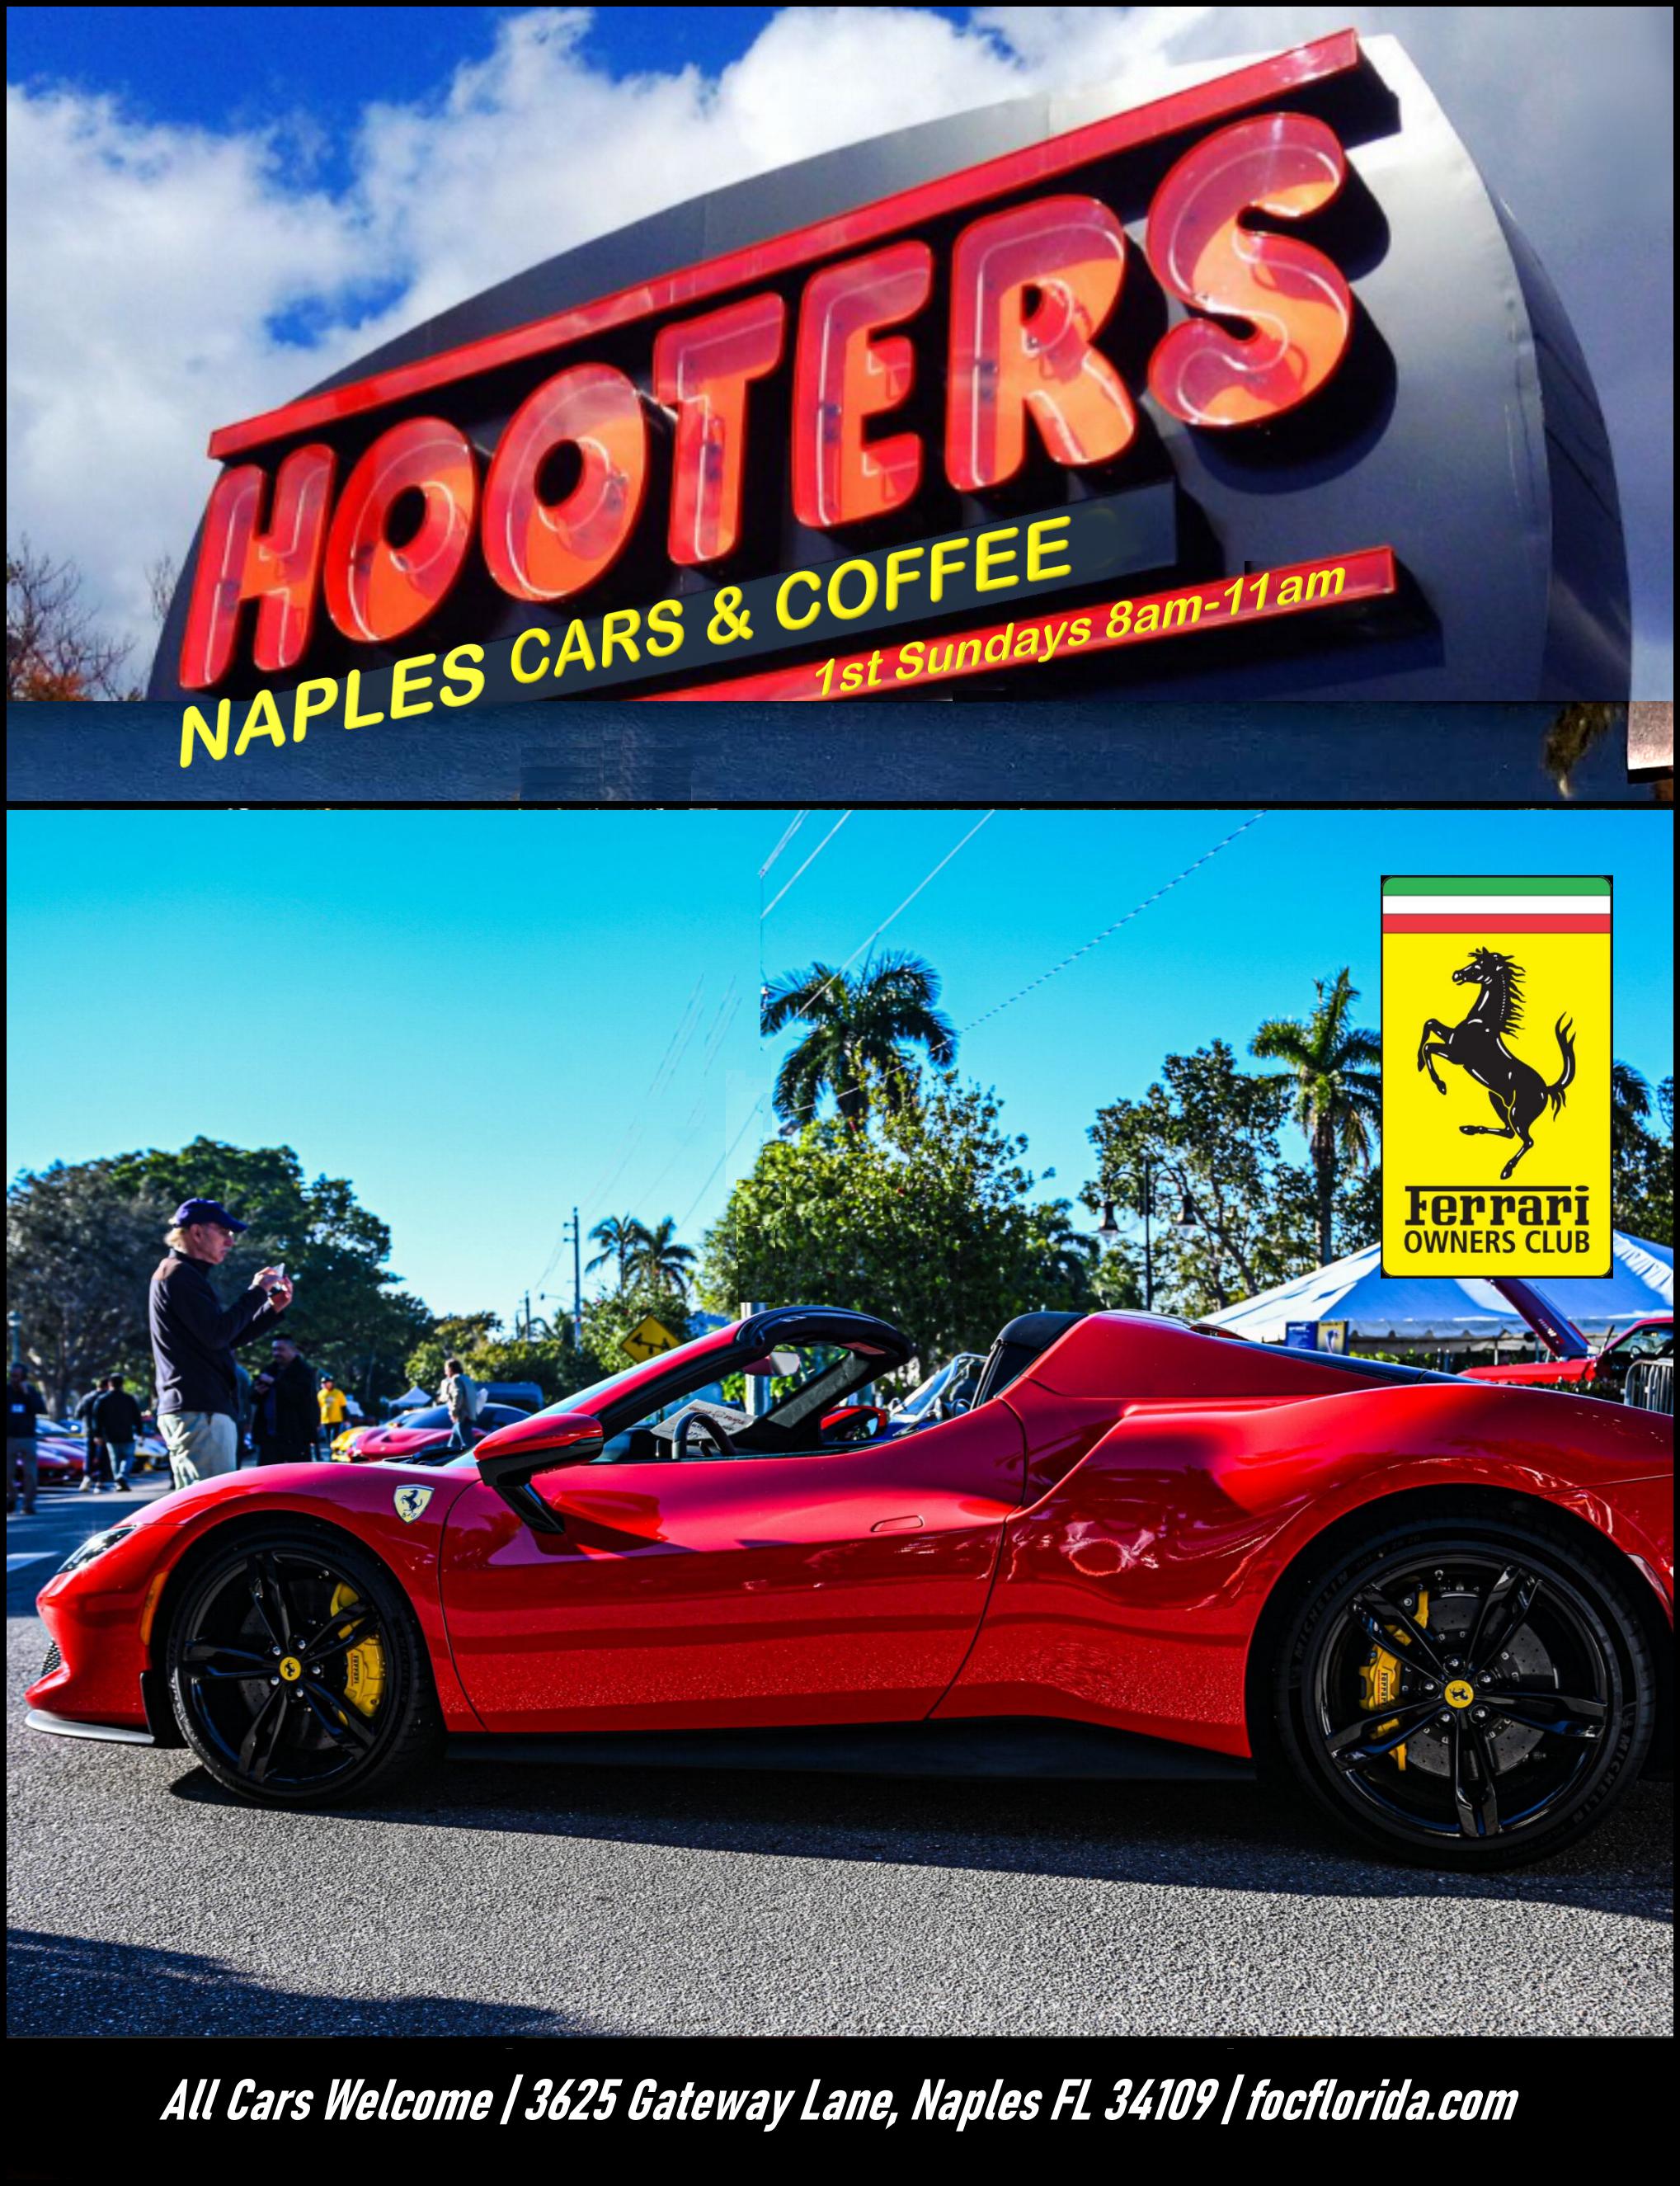 Hooters Cars and Coffee